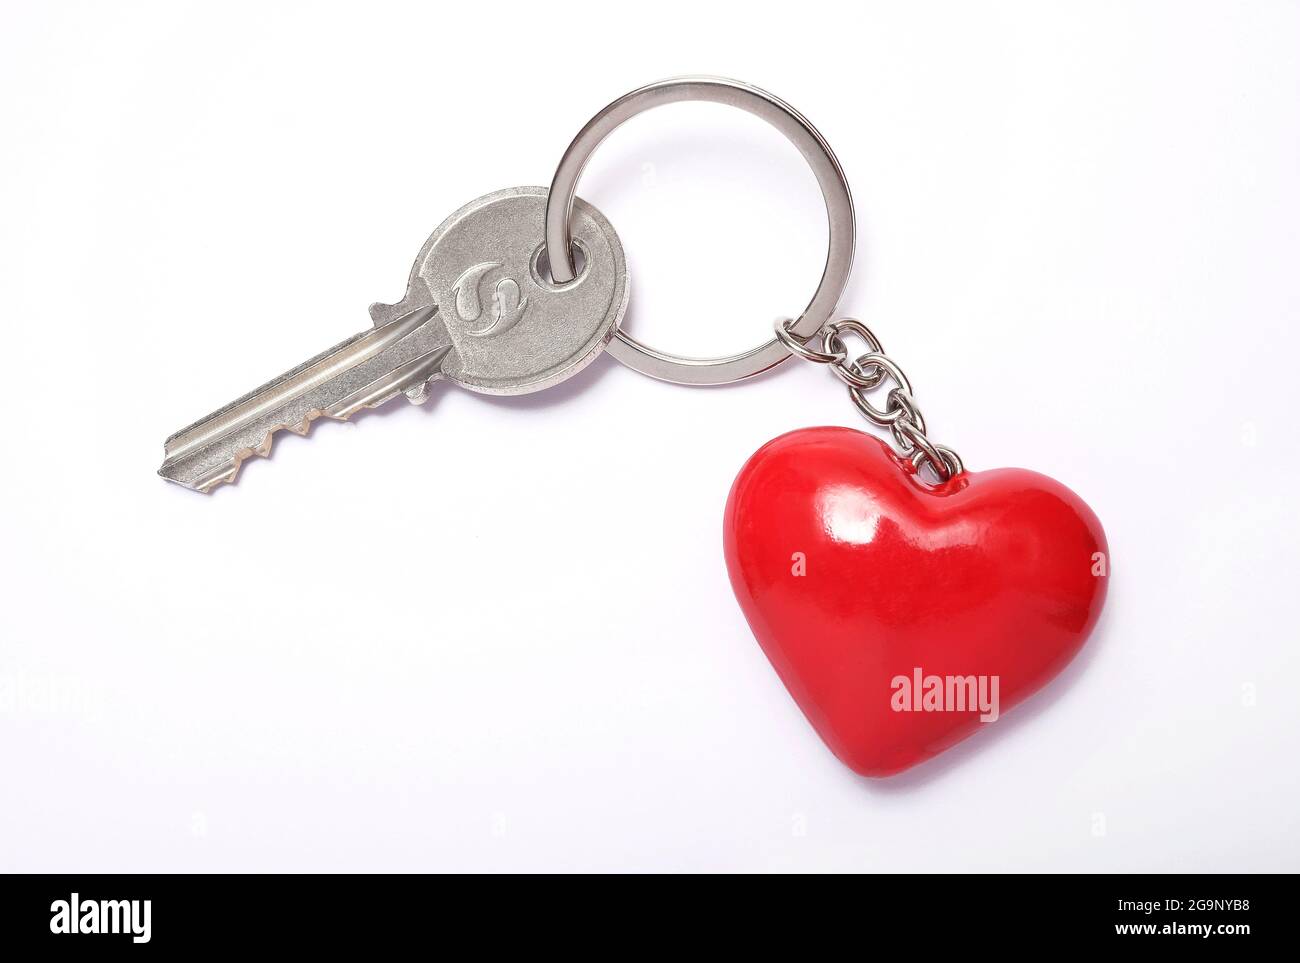 house key and red heart shaped keyring on white background Stock Photo